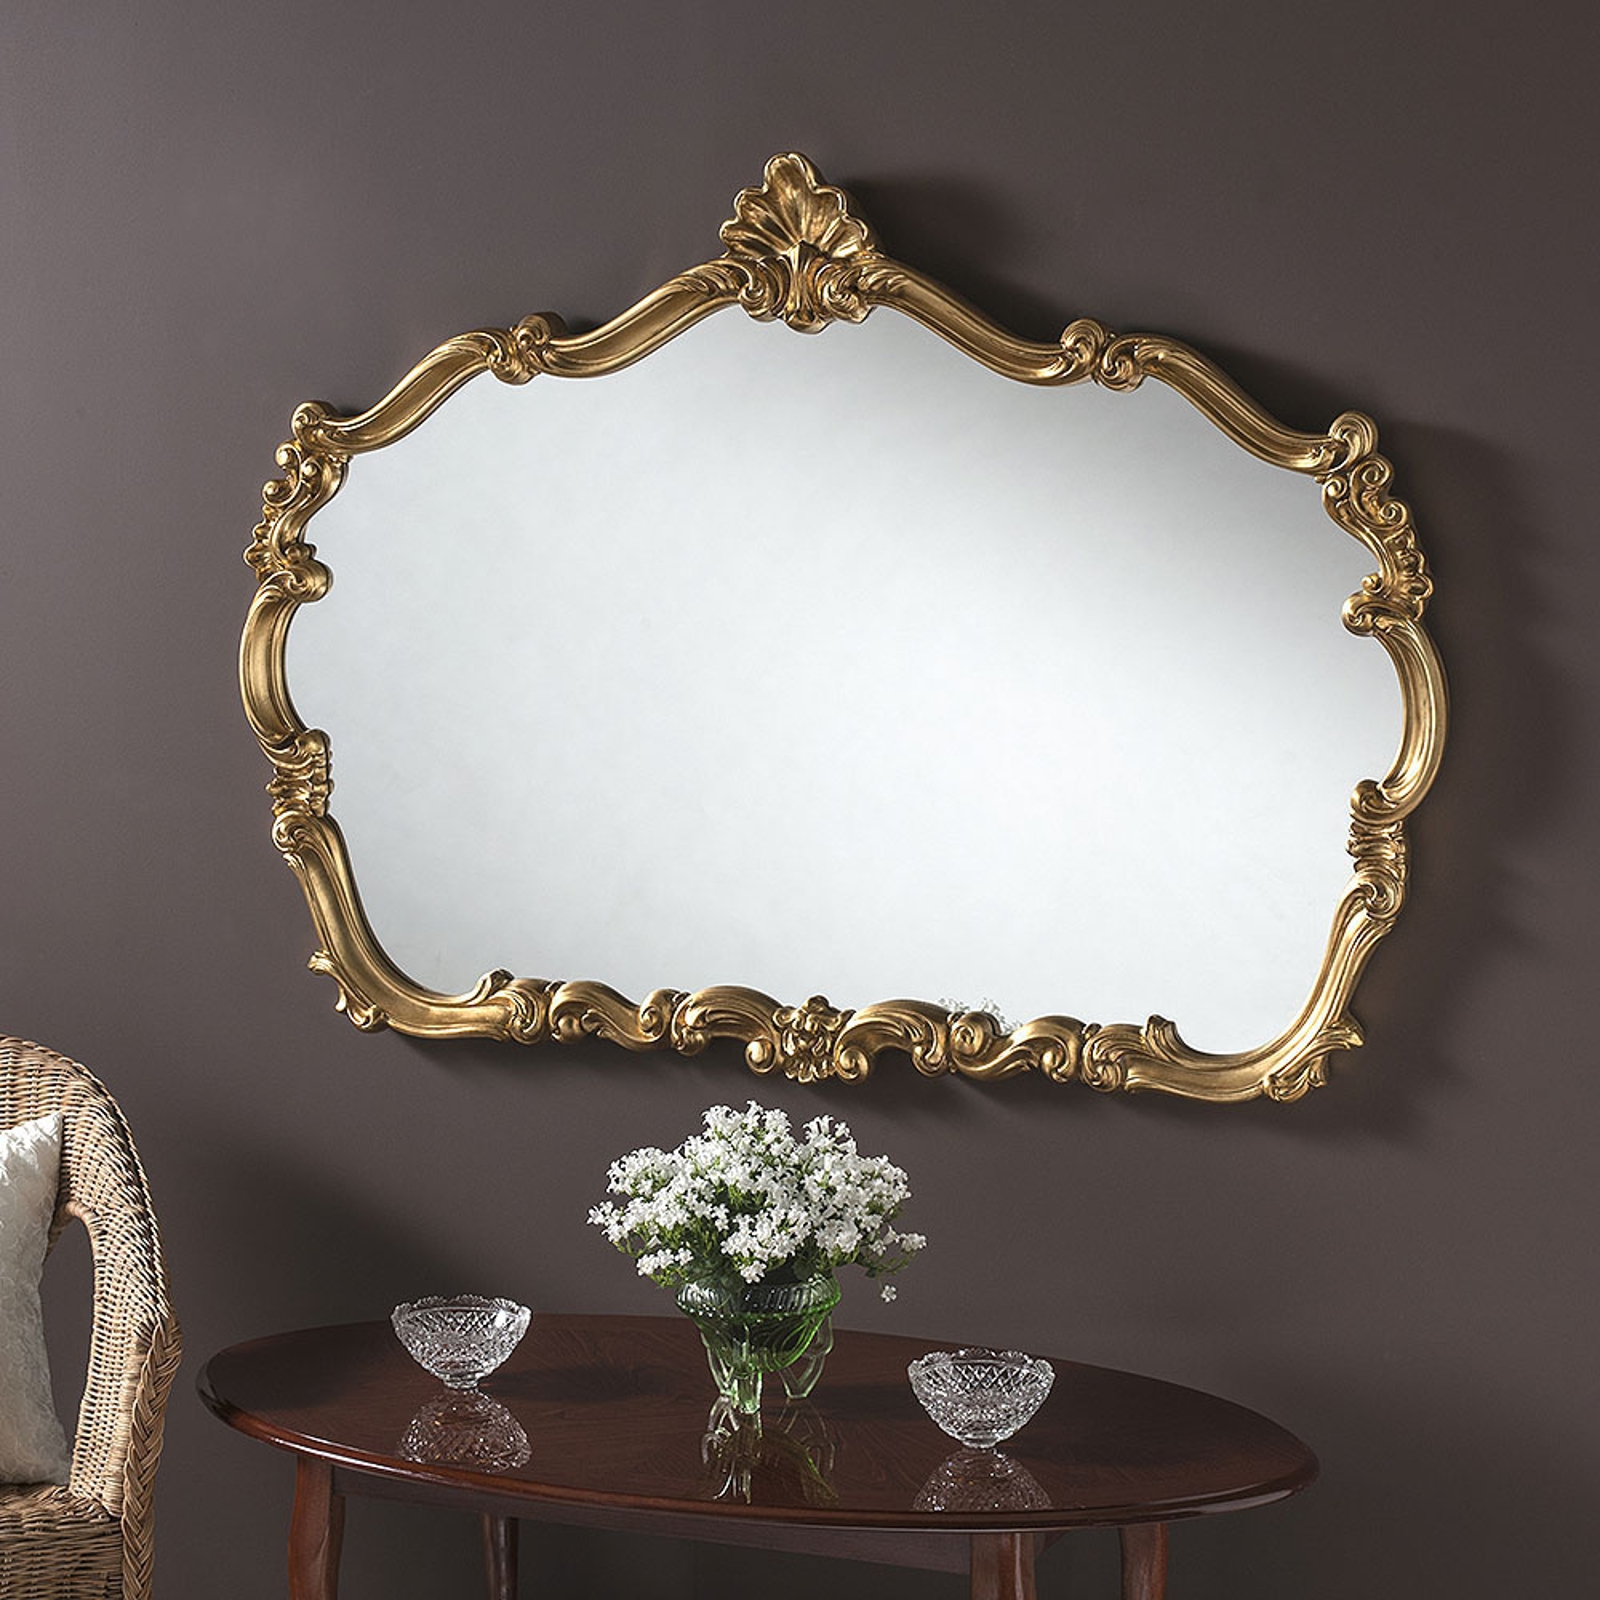 Crested Shaped Large Ornate Framed Wall Mirror Gold £